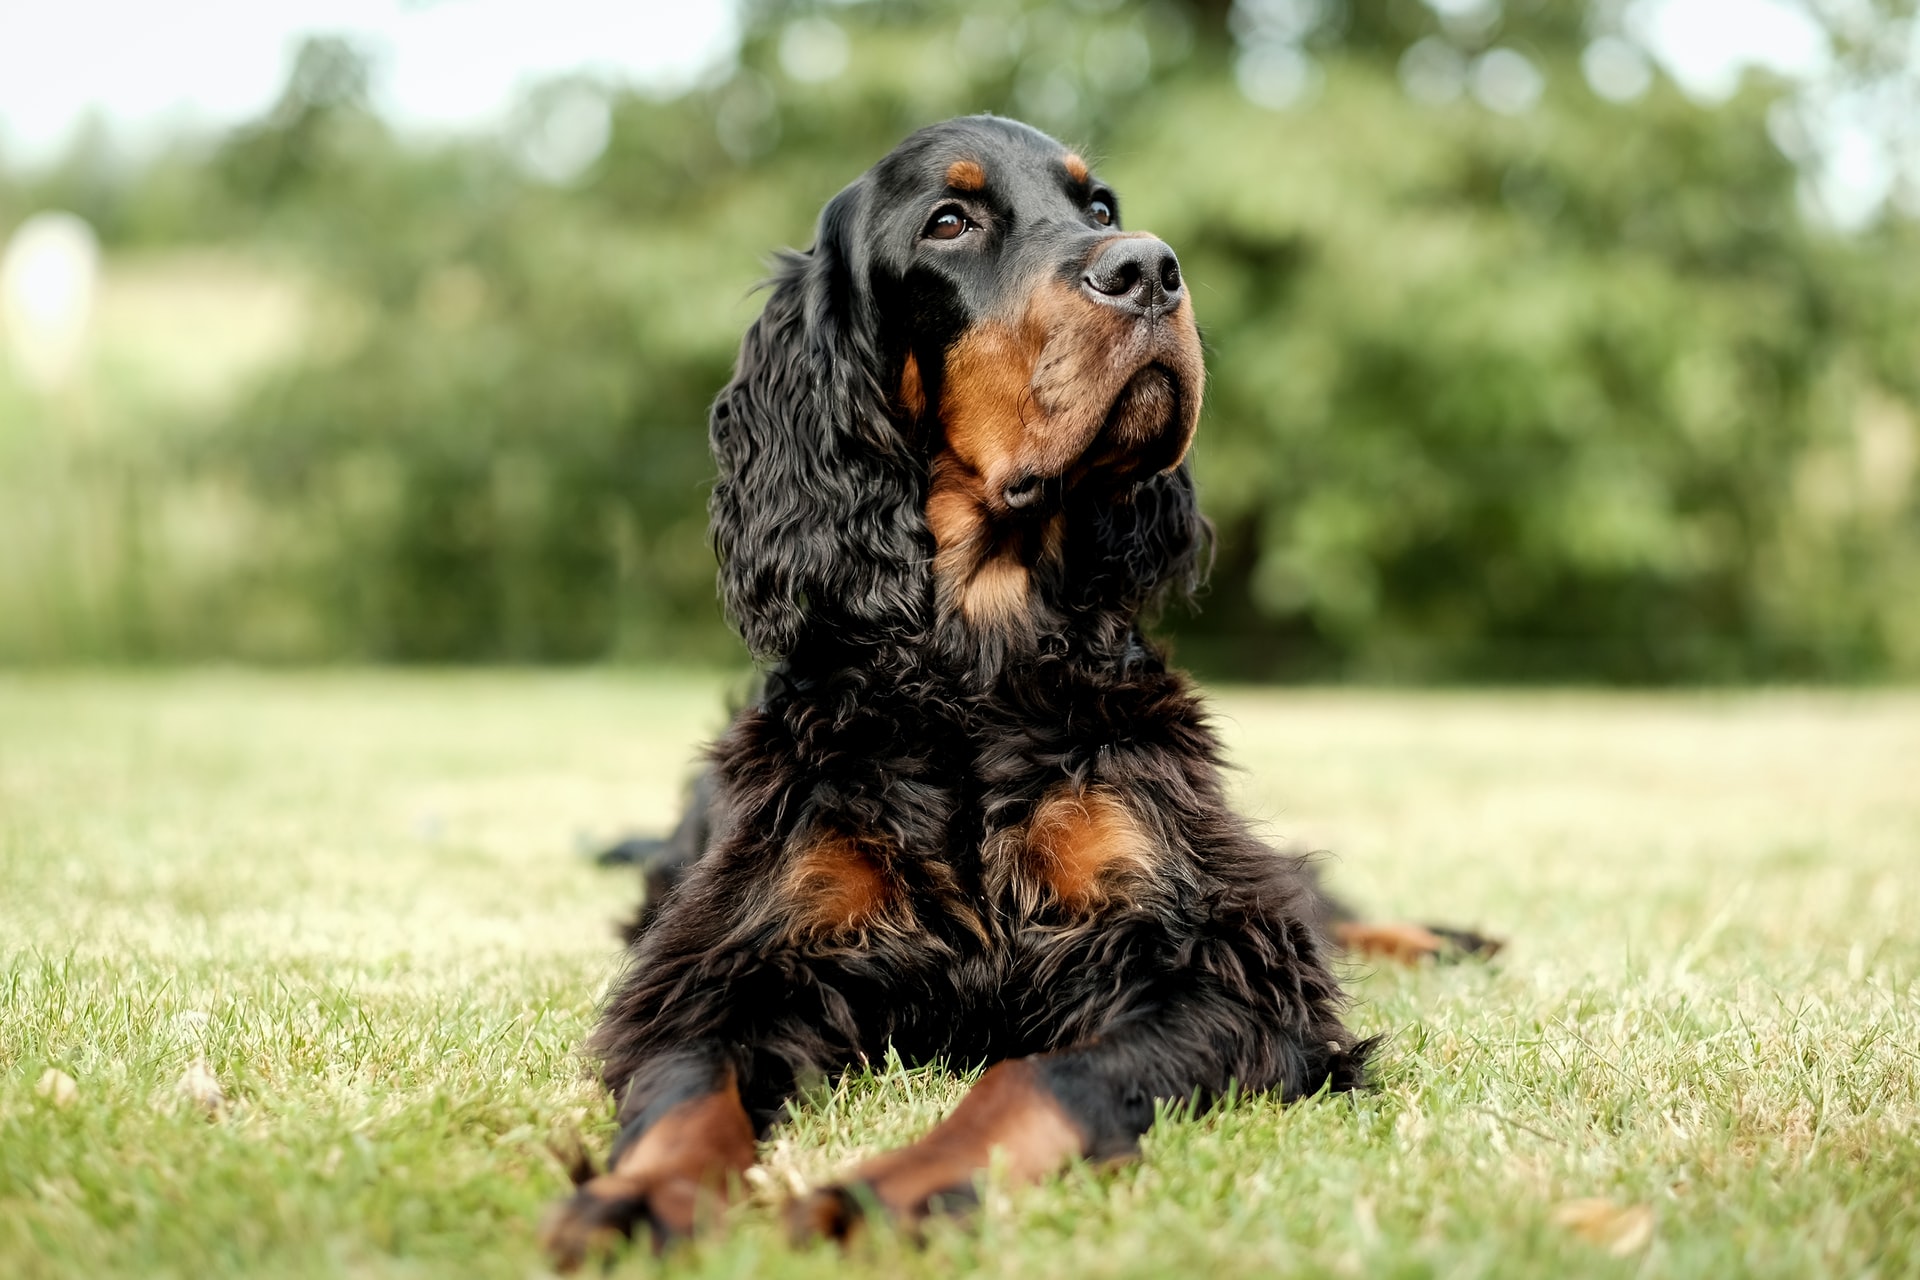 black and brown long coated dog on green grass field in daytime 